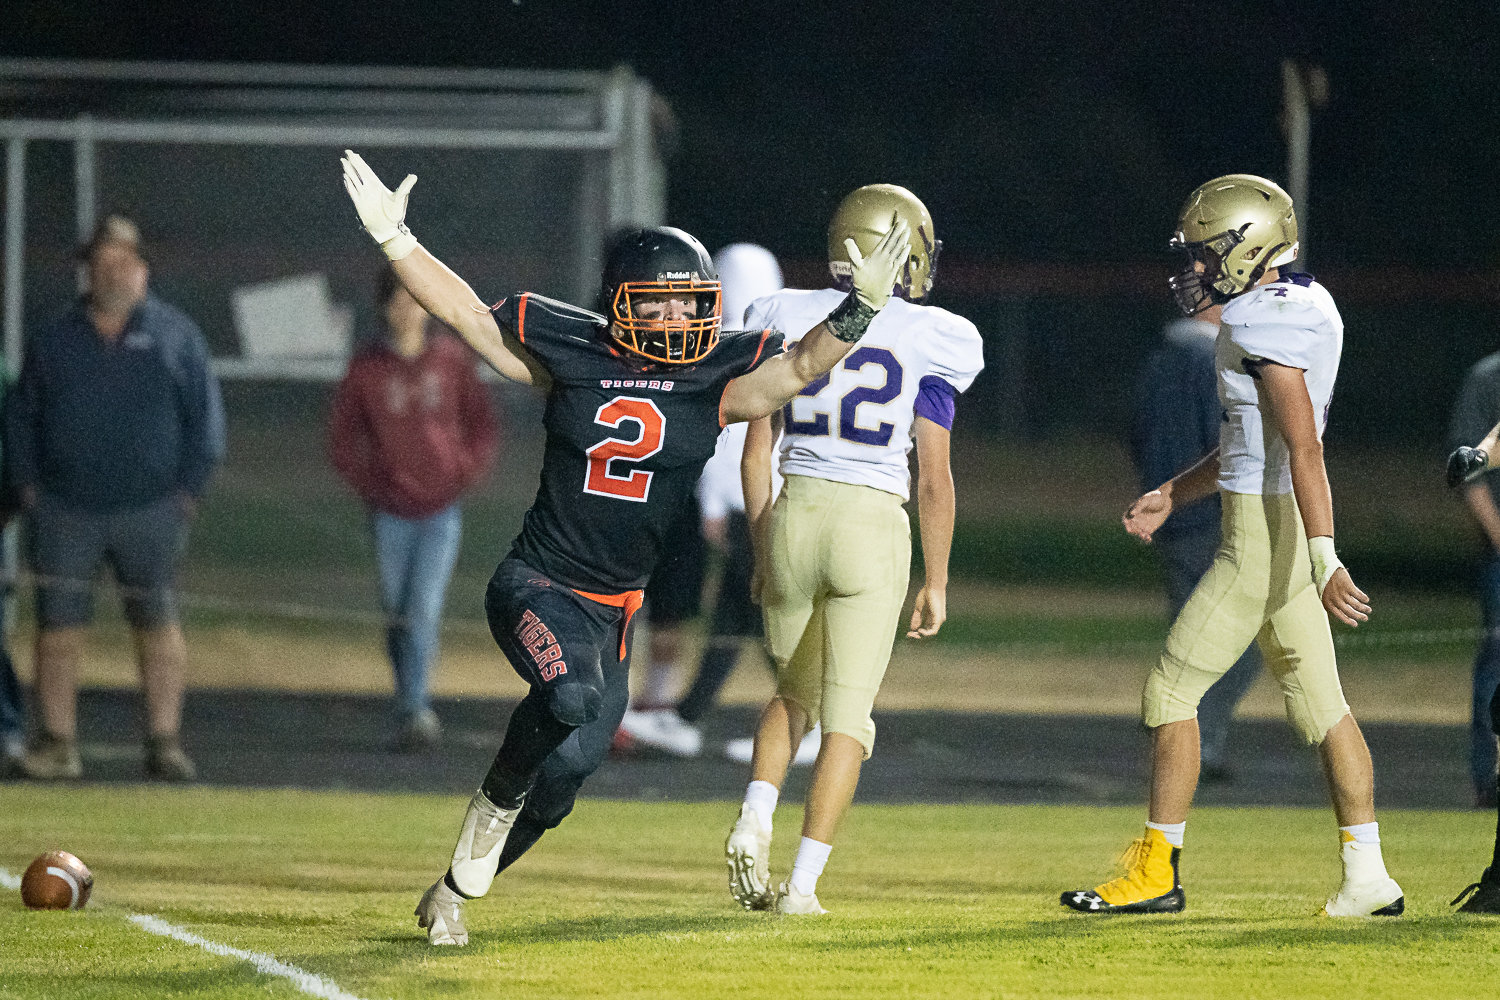 Napavine tailback Cael Stanley celebrates after a touchdown run in the second quarter against Onalaska Sept. 9.